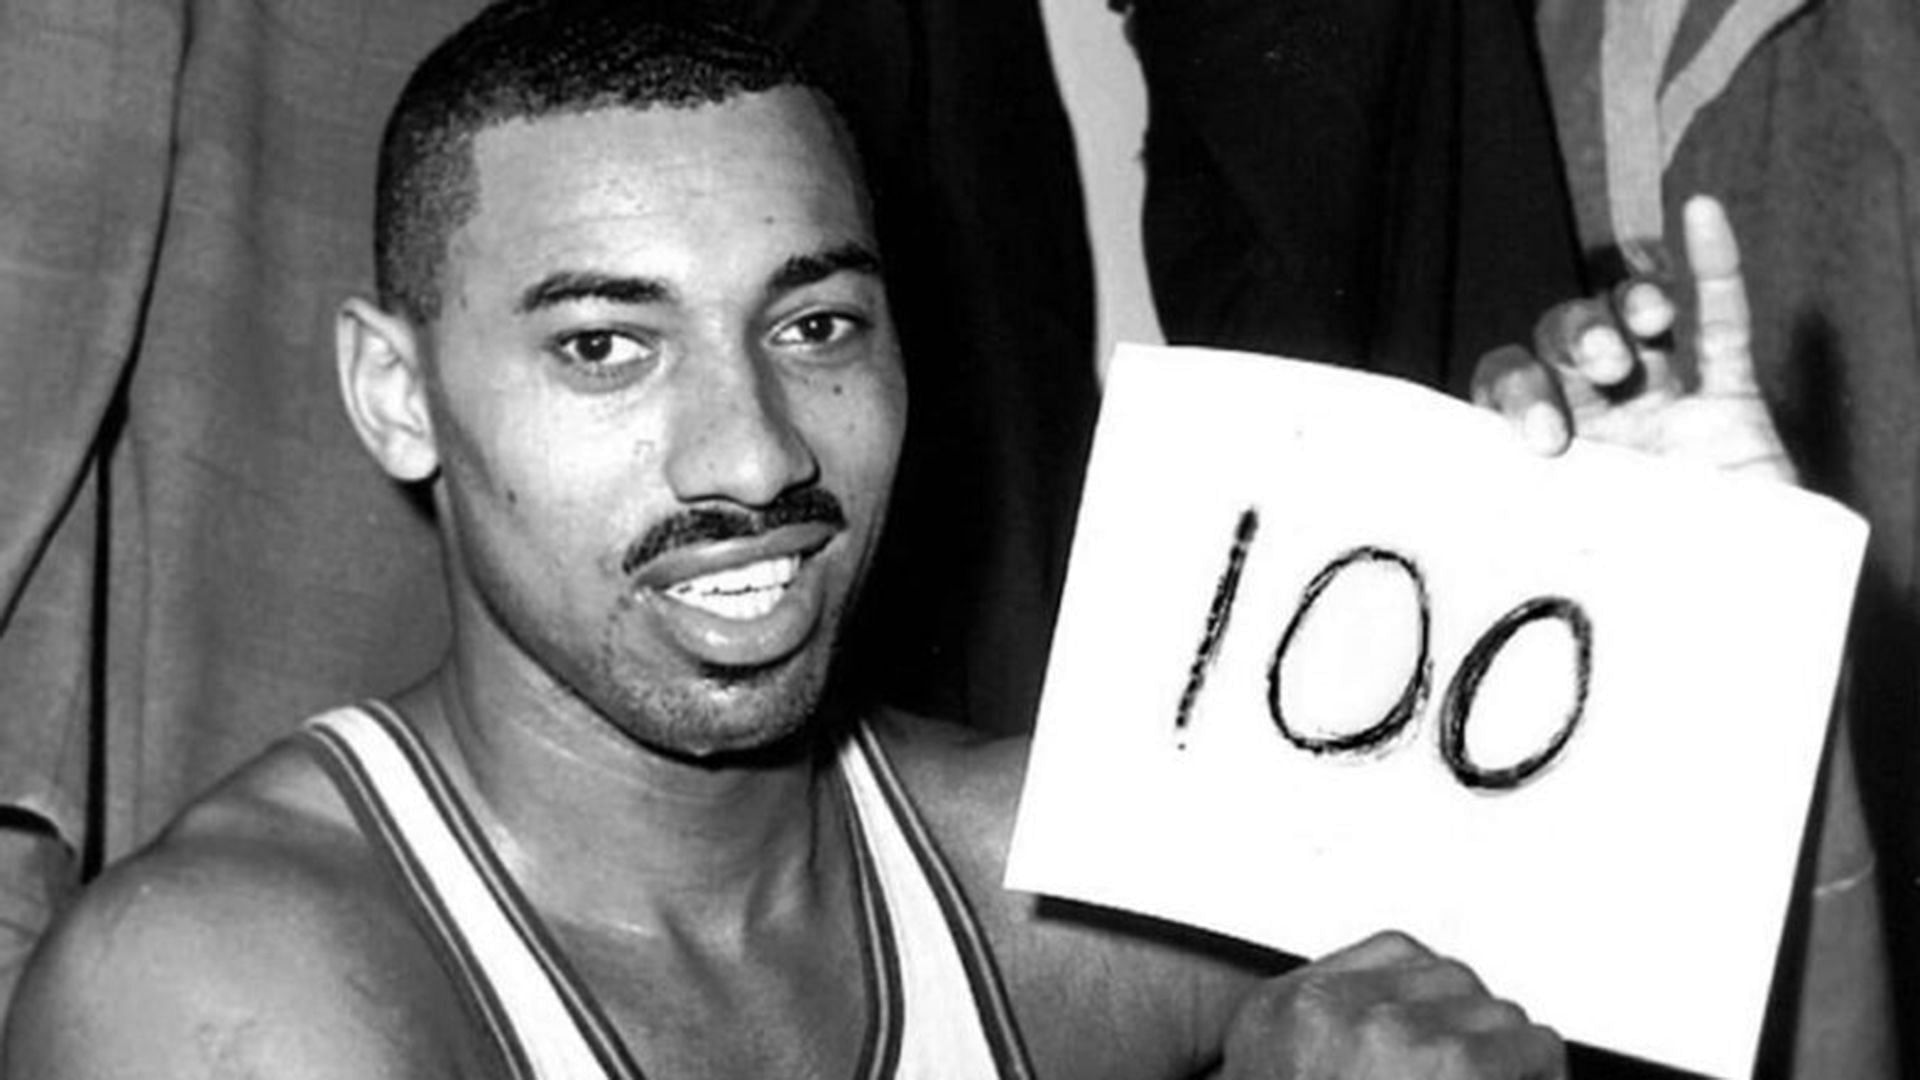 Wilt Chamberlain was one of the most dominant scorers in NBA History